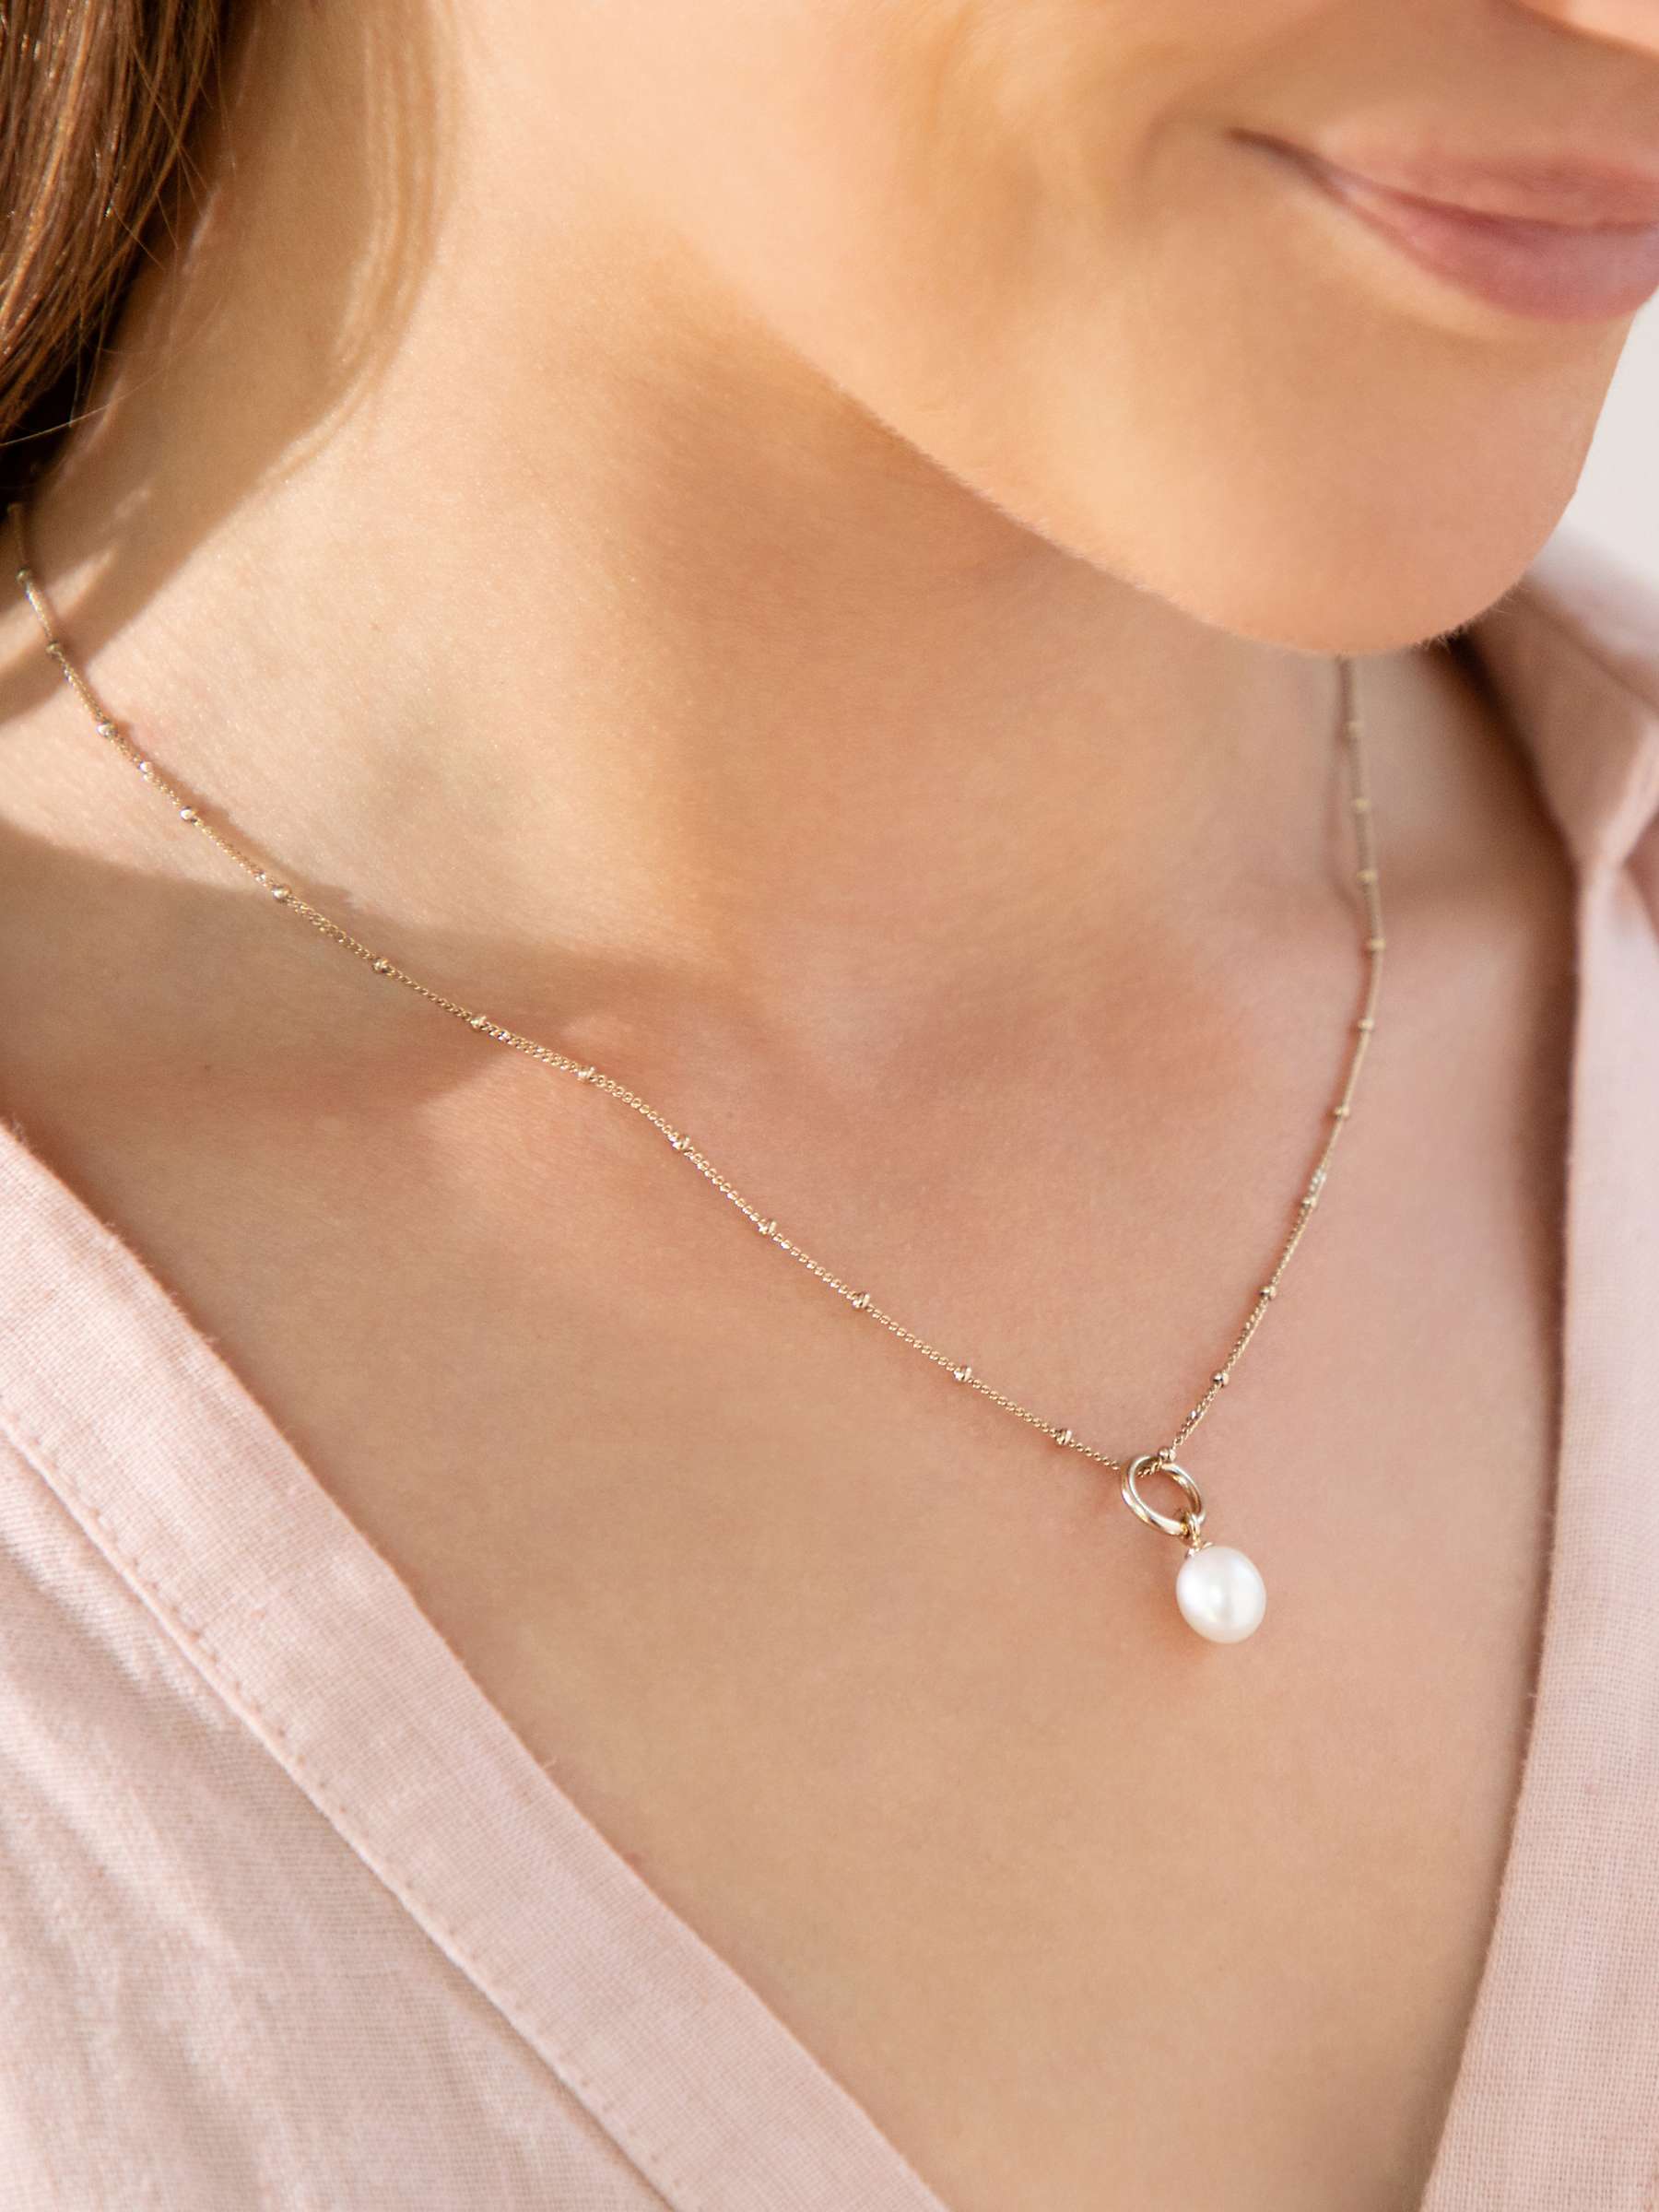 Buy Recognised Freedom Pearl Bobble Chain Pendant Necklace Online at johnlewis.com